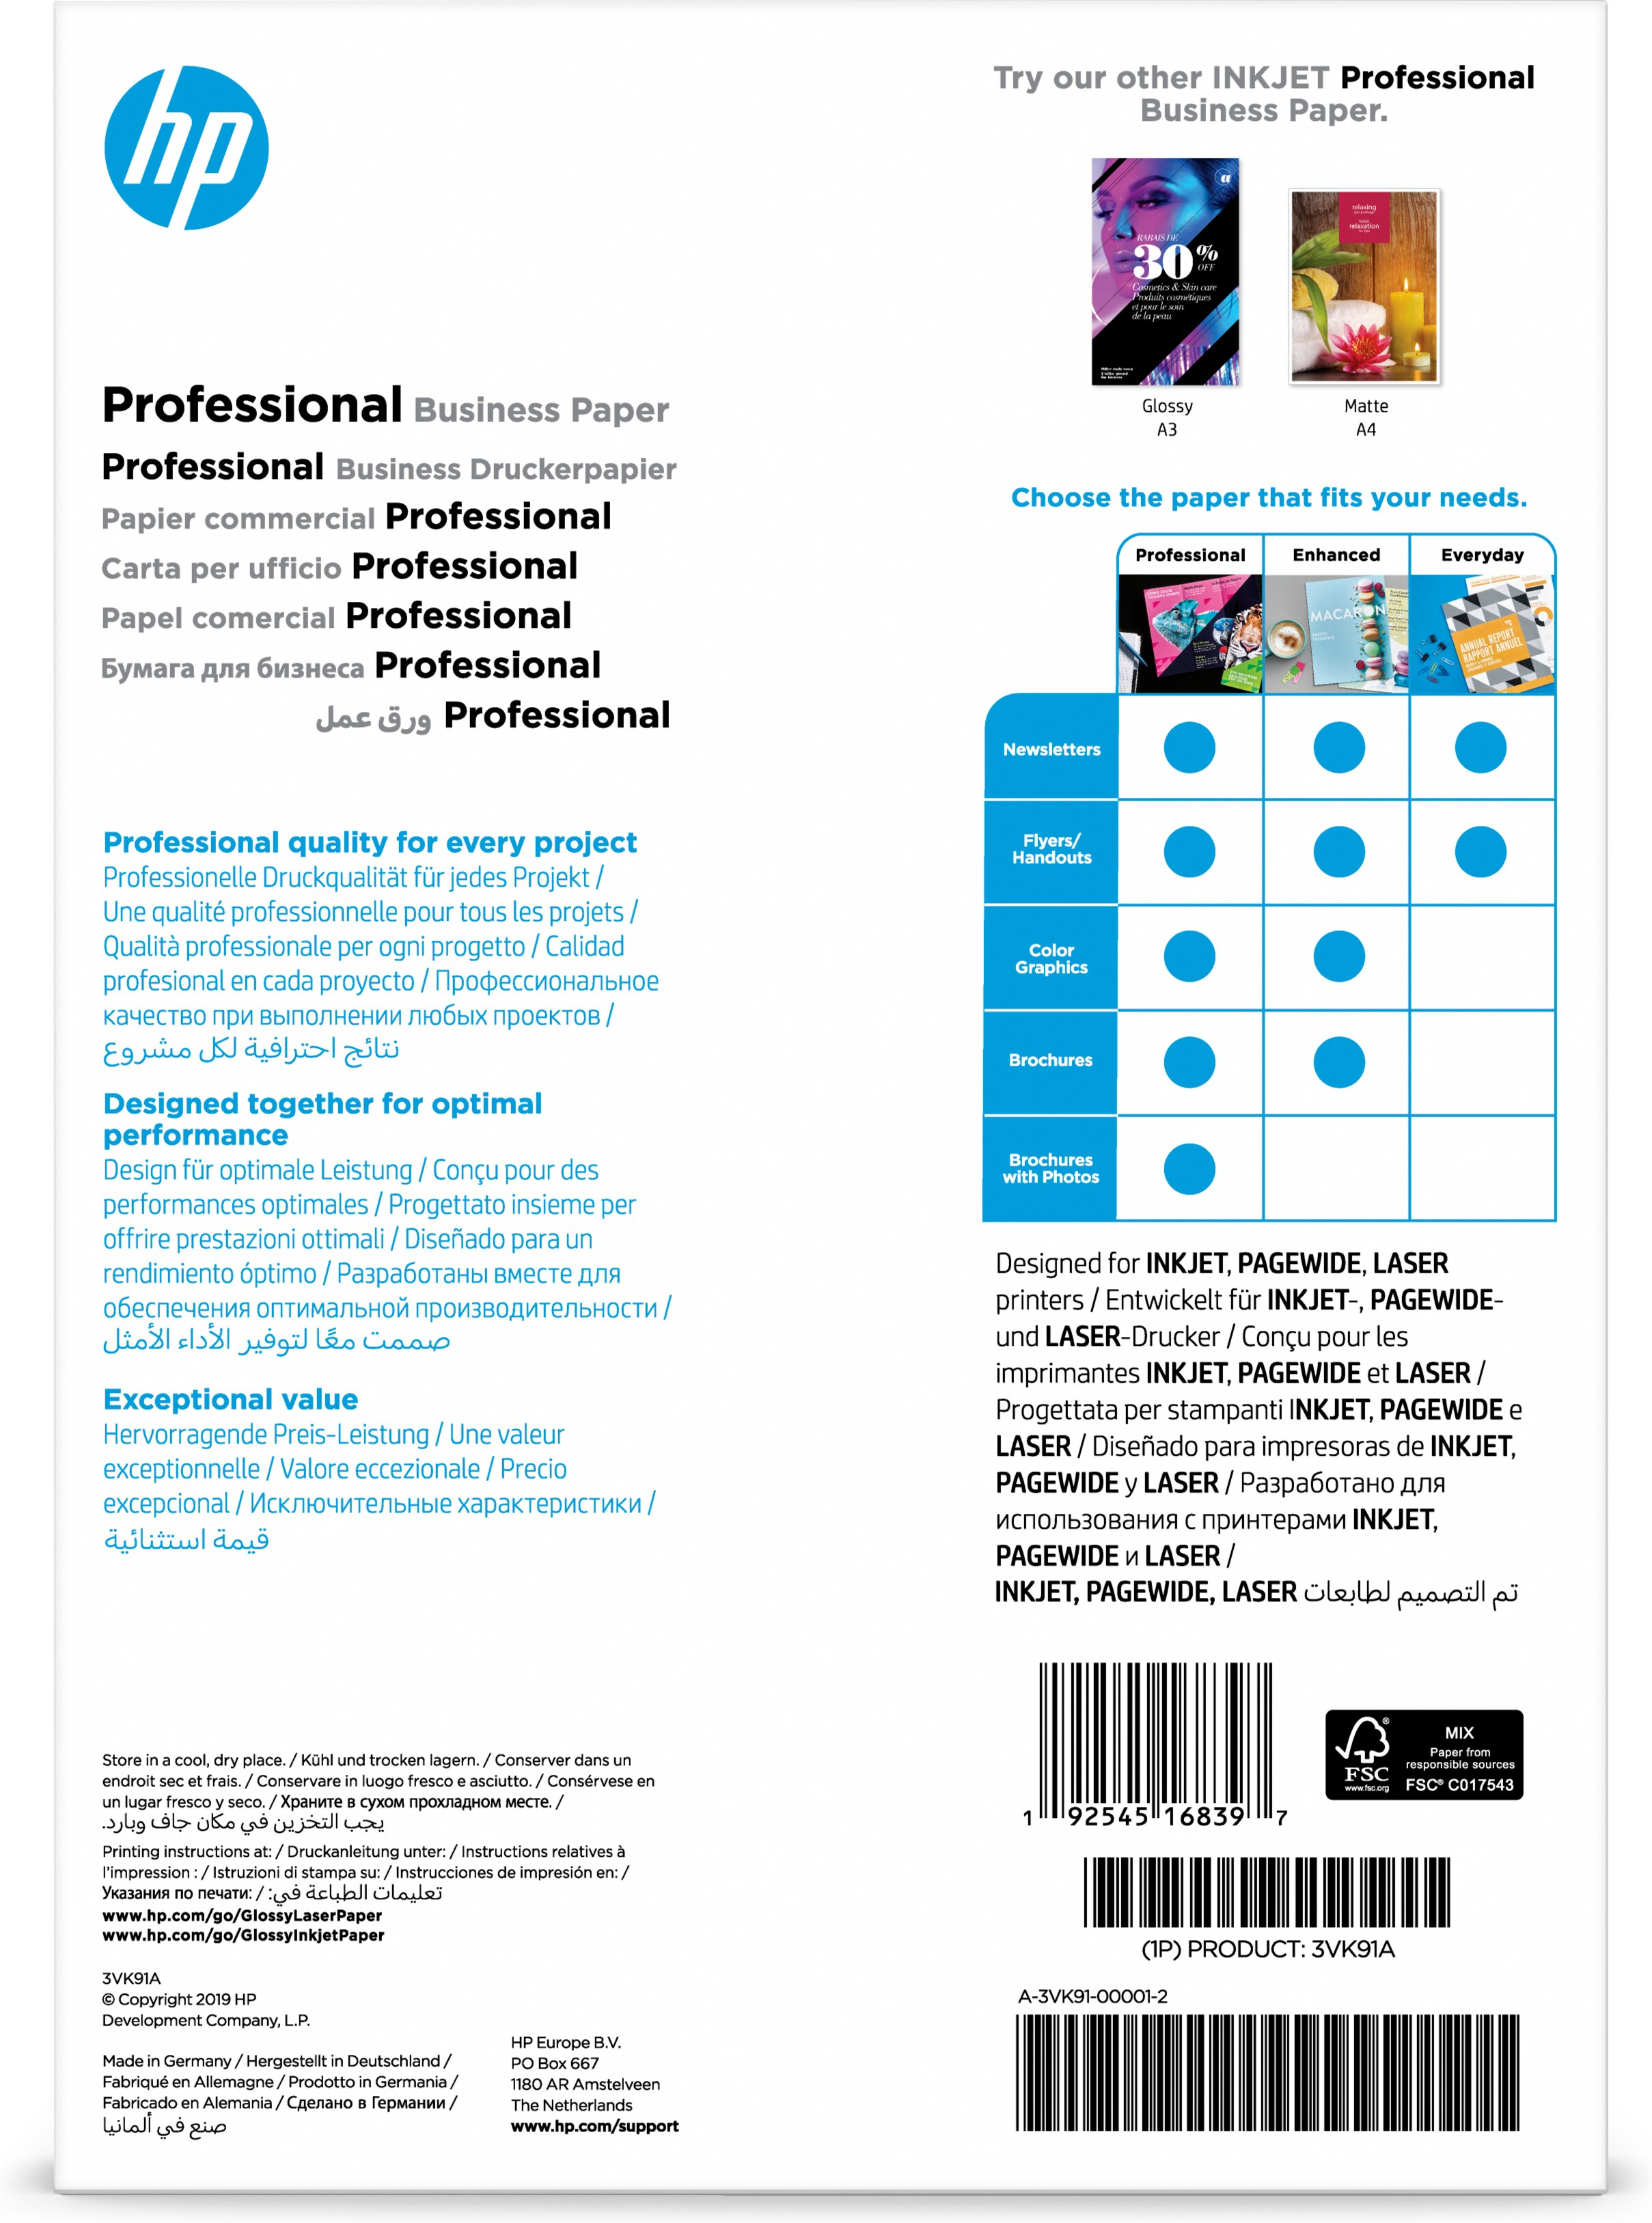 HP Professional Glossy Paper